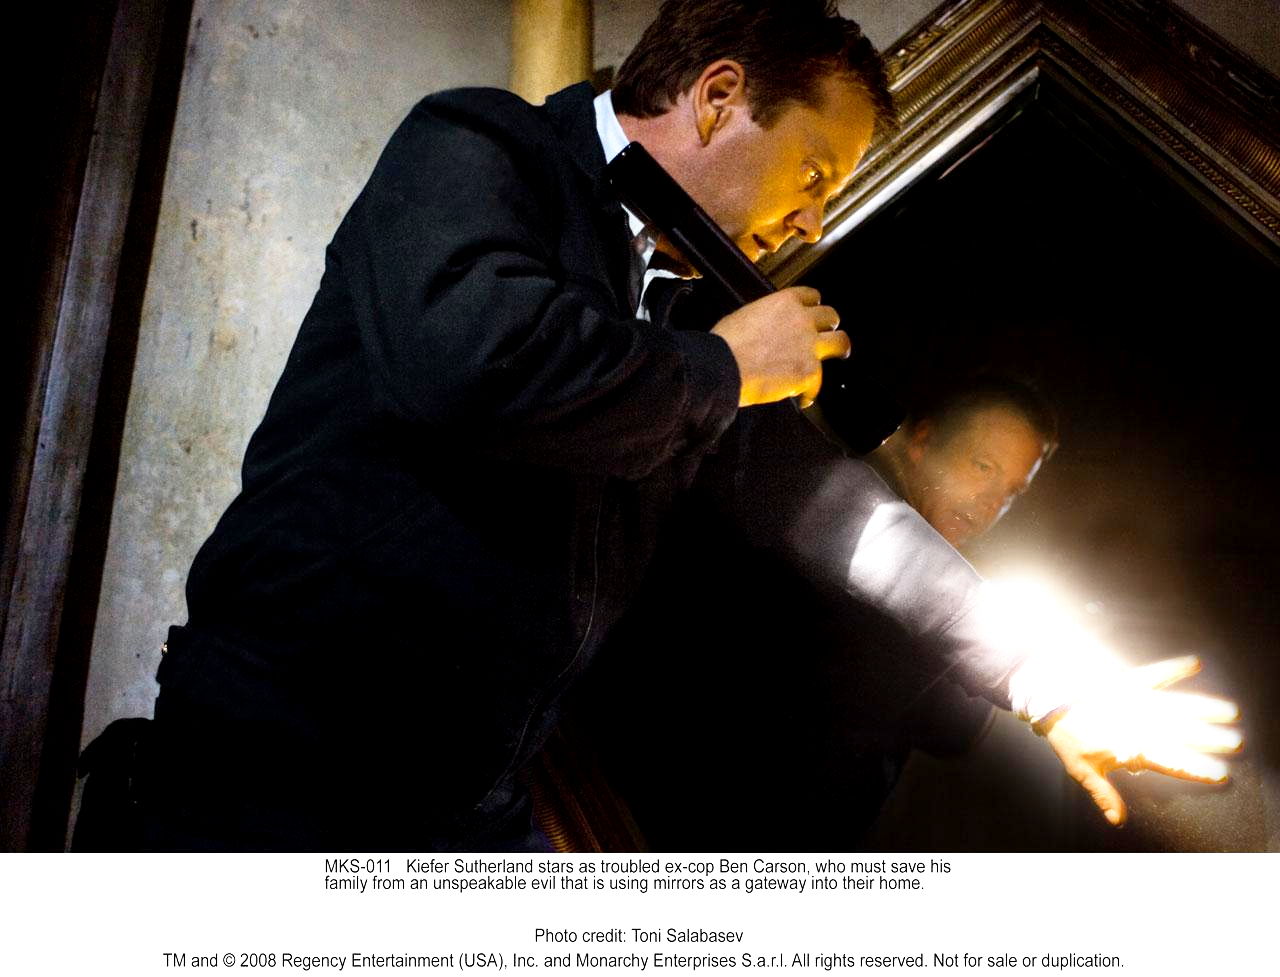 Kiefer Sutherland stars as Ben Carson in The 20th Century Fox's Mirrors (2008). Photo credit by Toni Salabasev.